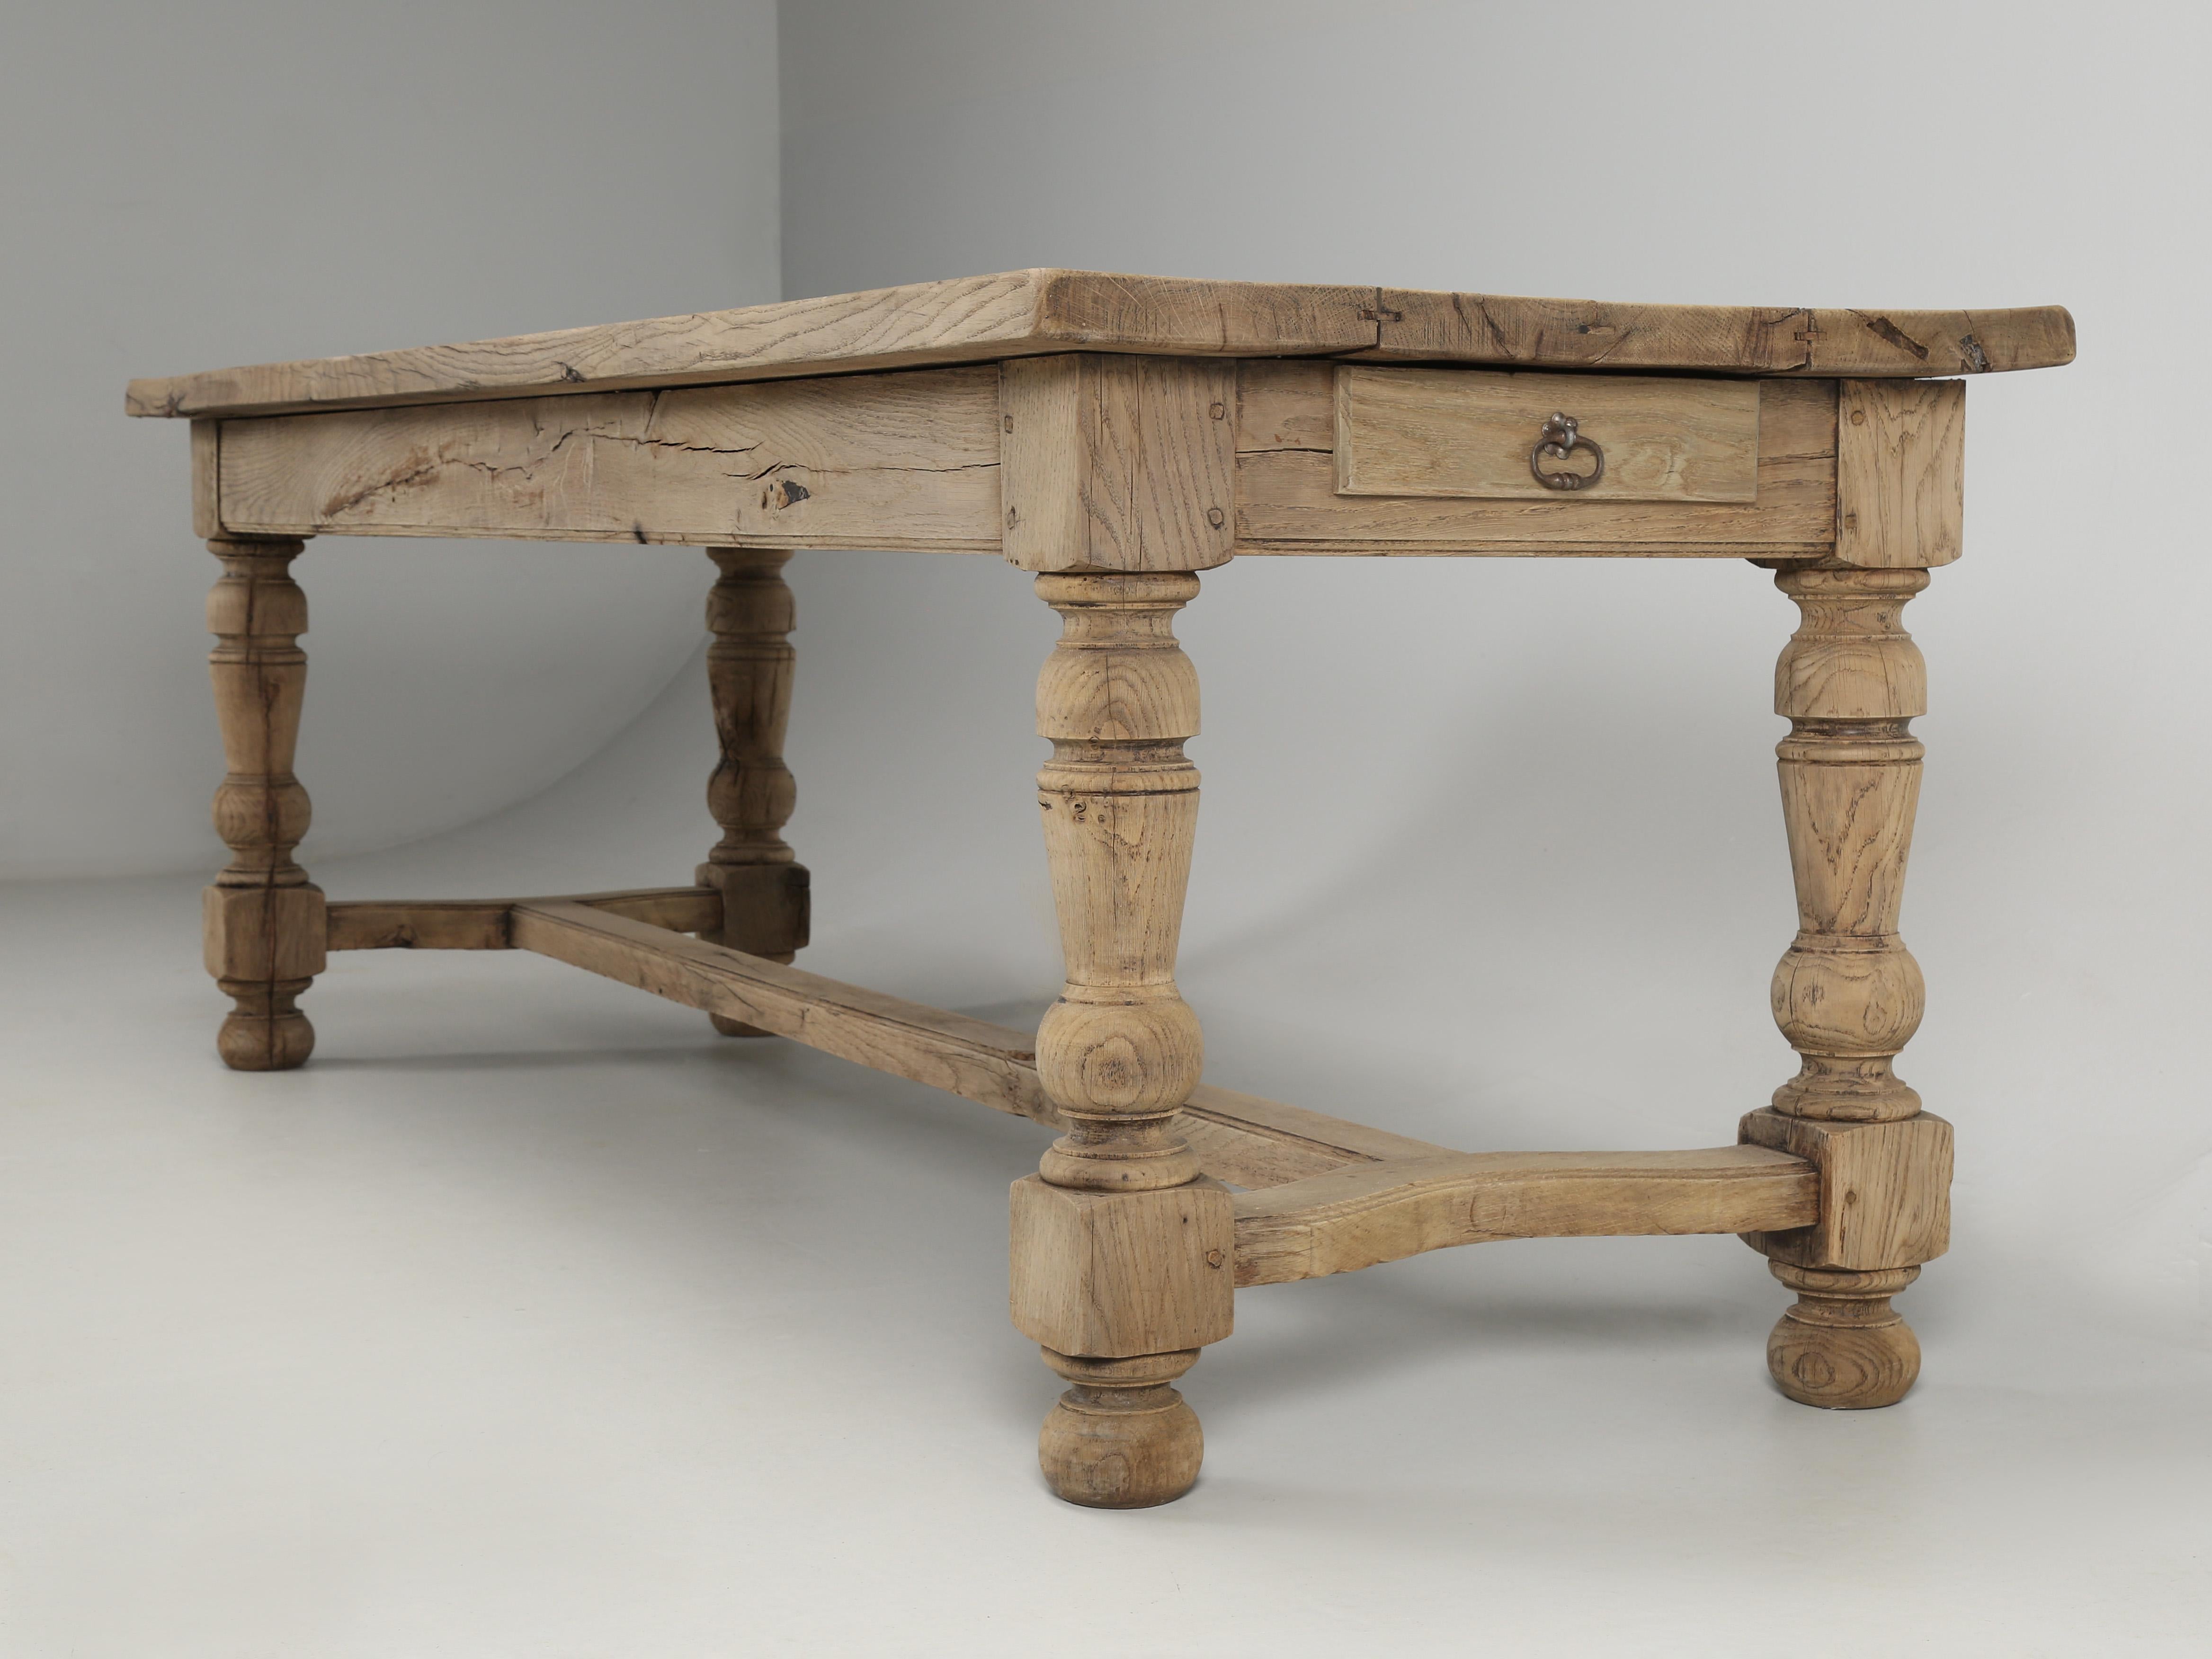 Antique Irish Dining Table or Kitchen Table Finished in Natural White Oak 1800's 4